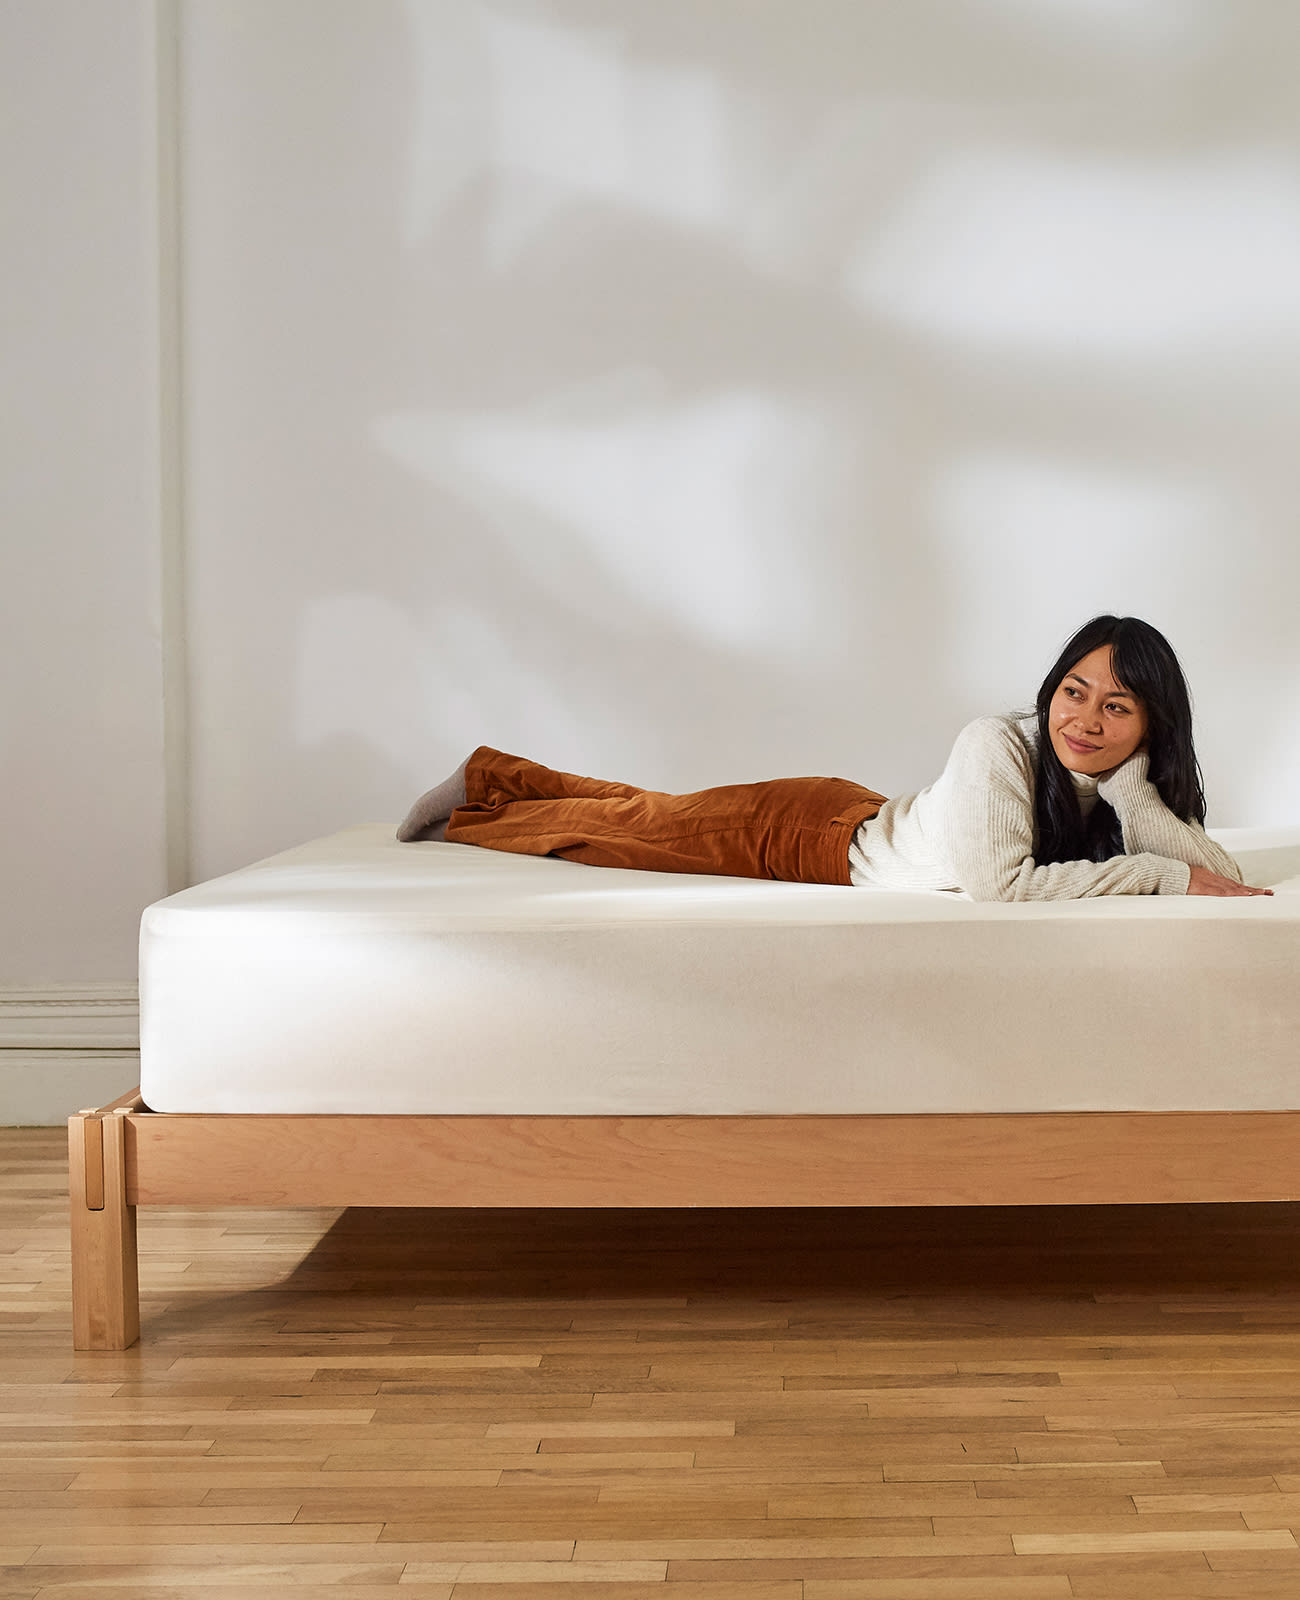 Shop the Madison Bed Frame  Premium Natural Materials - Helix Sleep